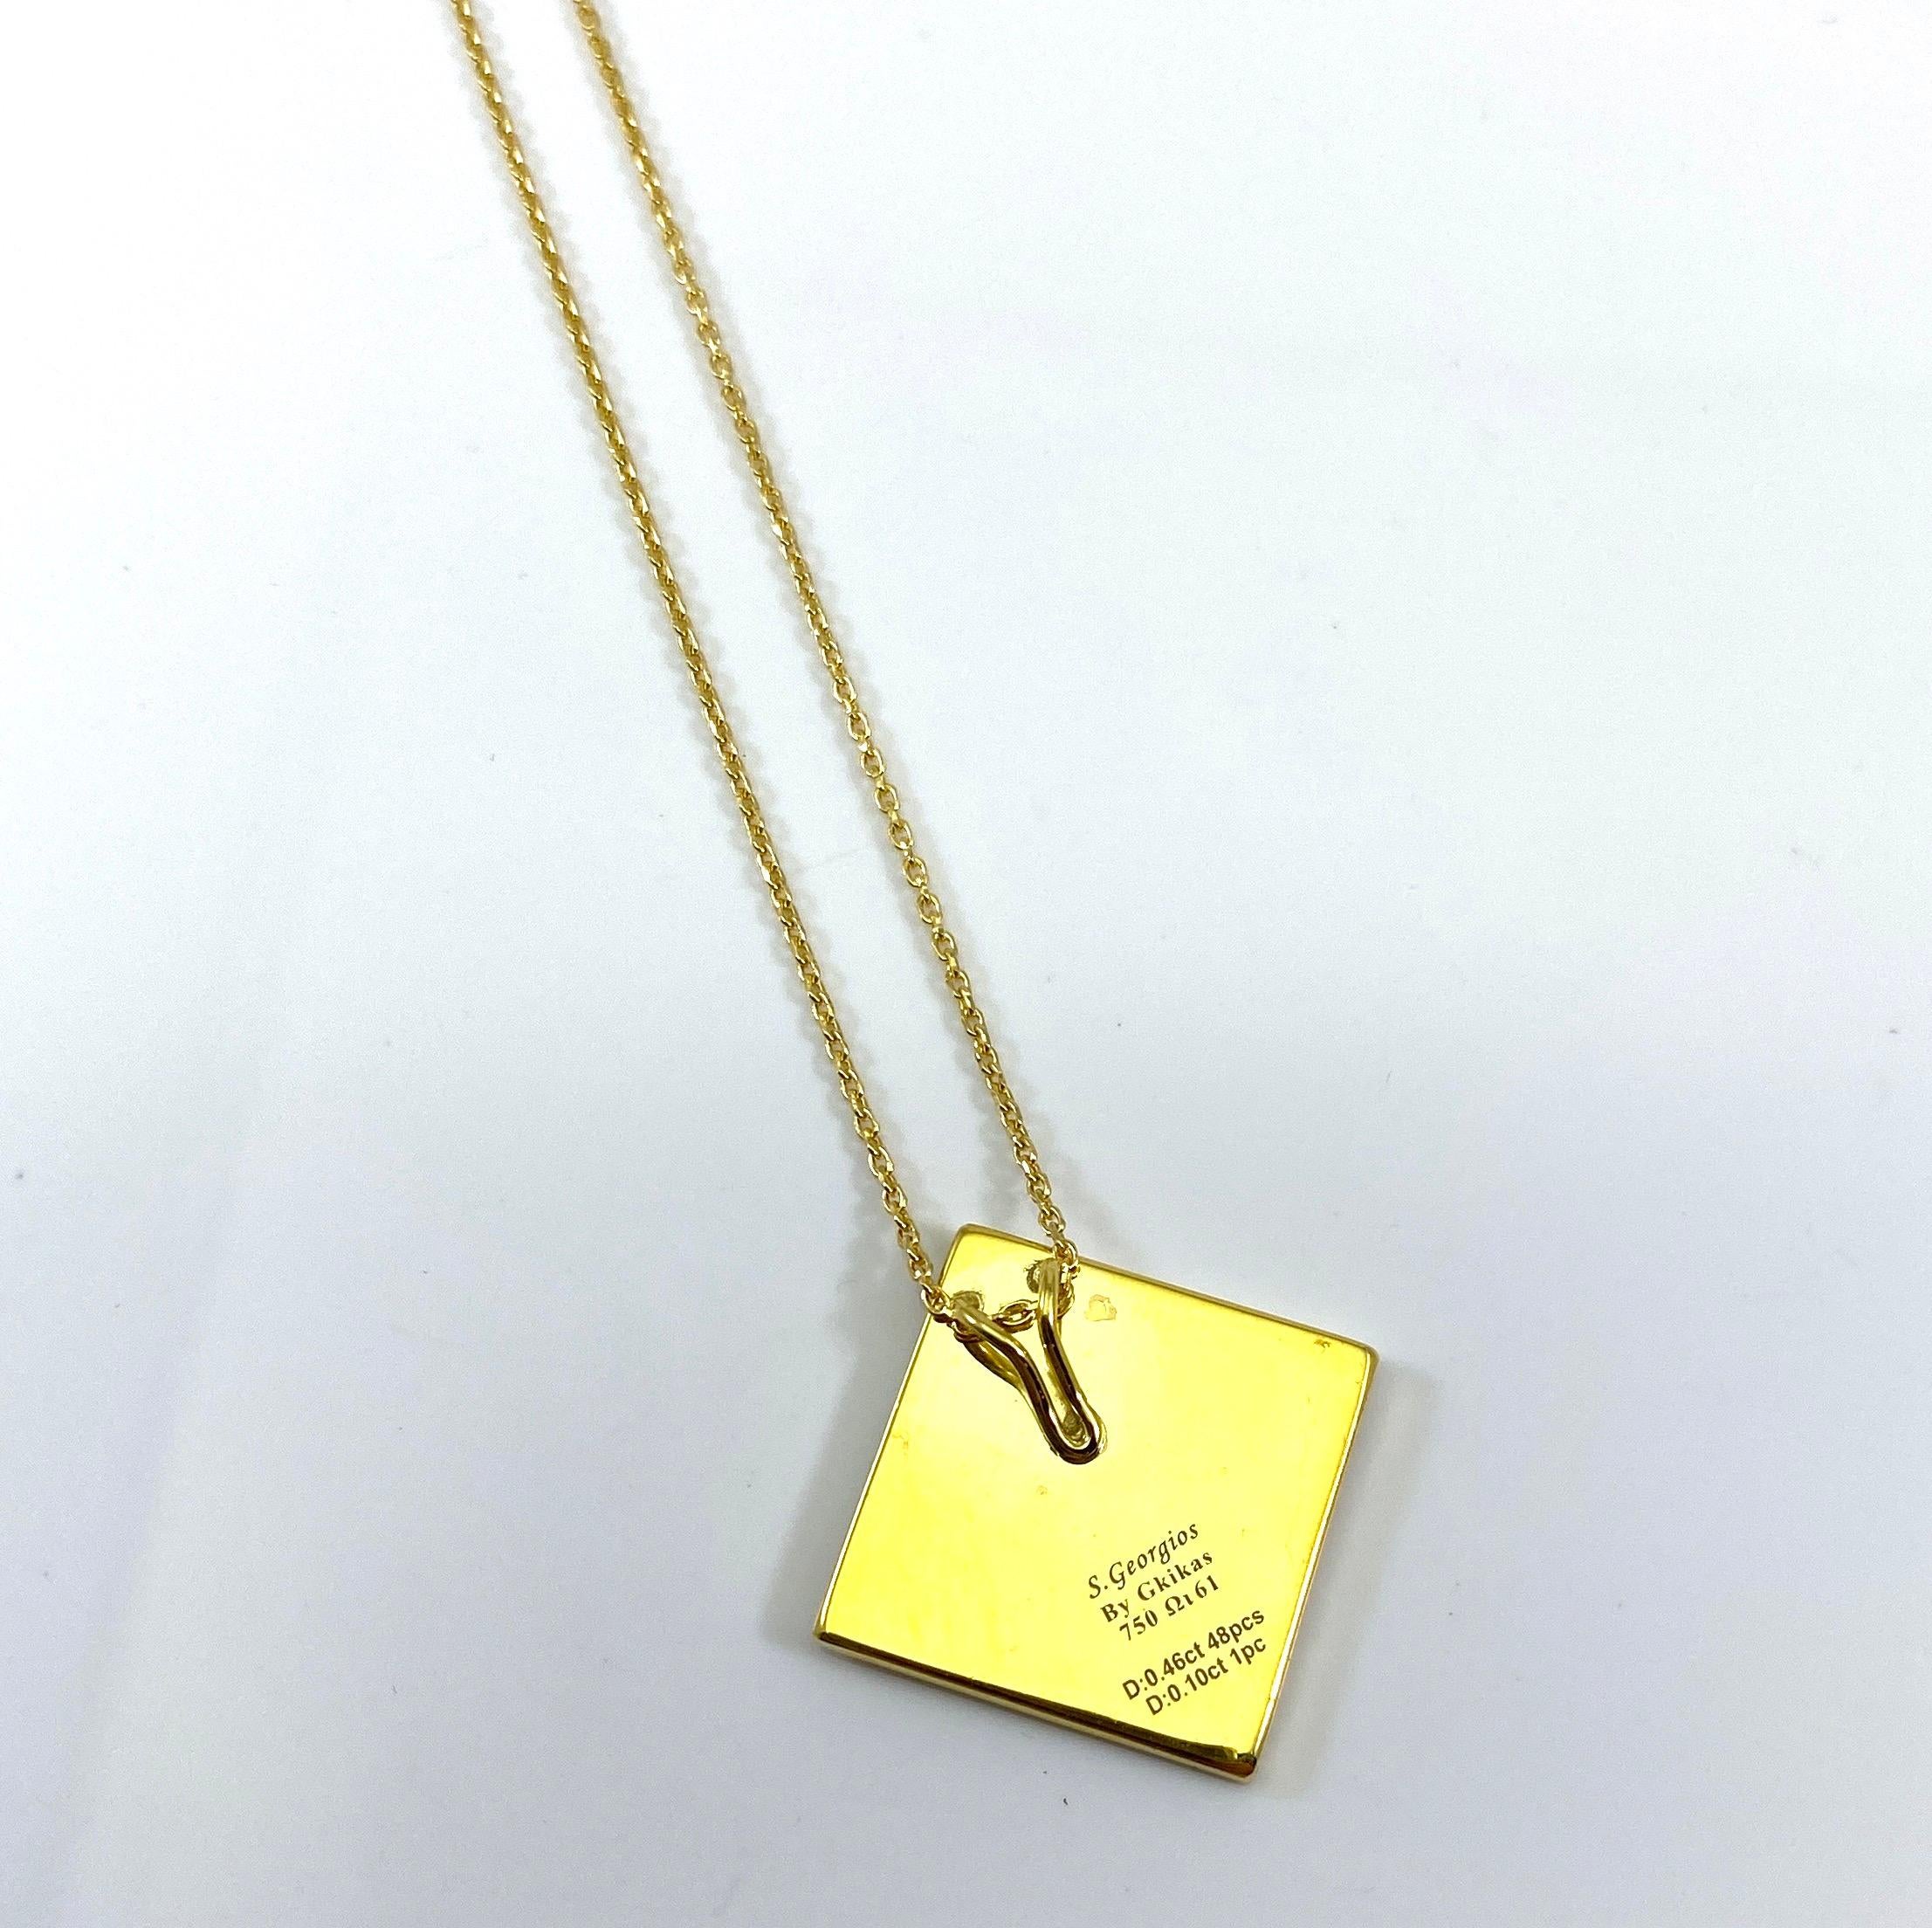 Georgios Collection 18 Karat Yellow Gold Diamond Square Pendant with Chain In New Condition For Sale In Astoria, NY